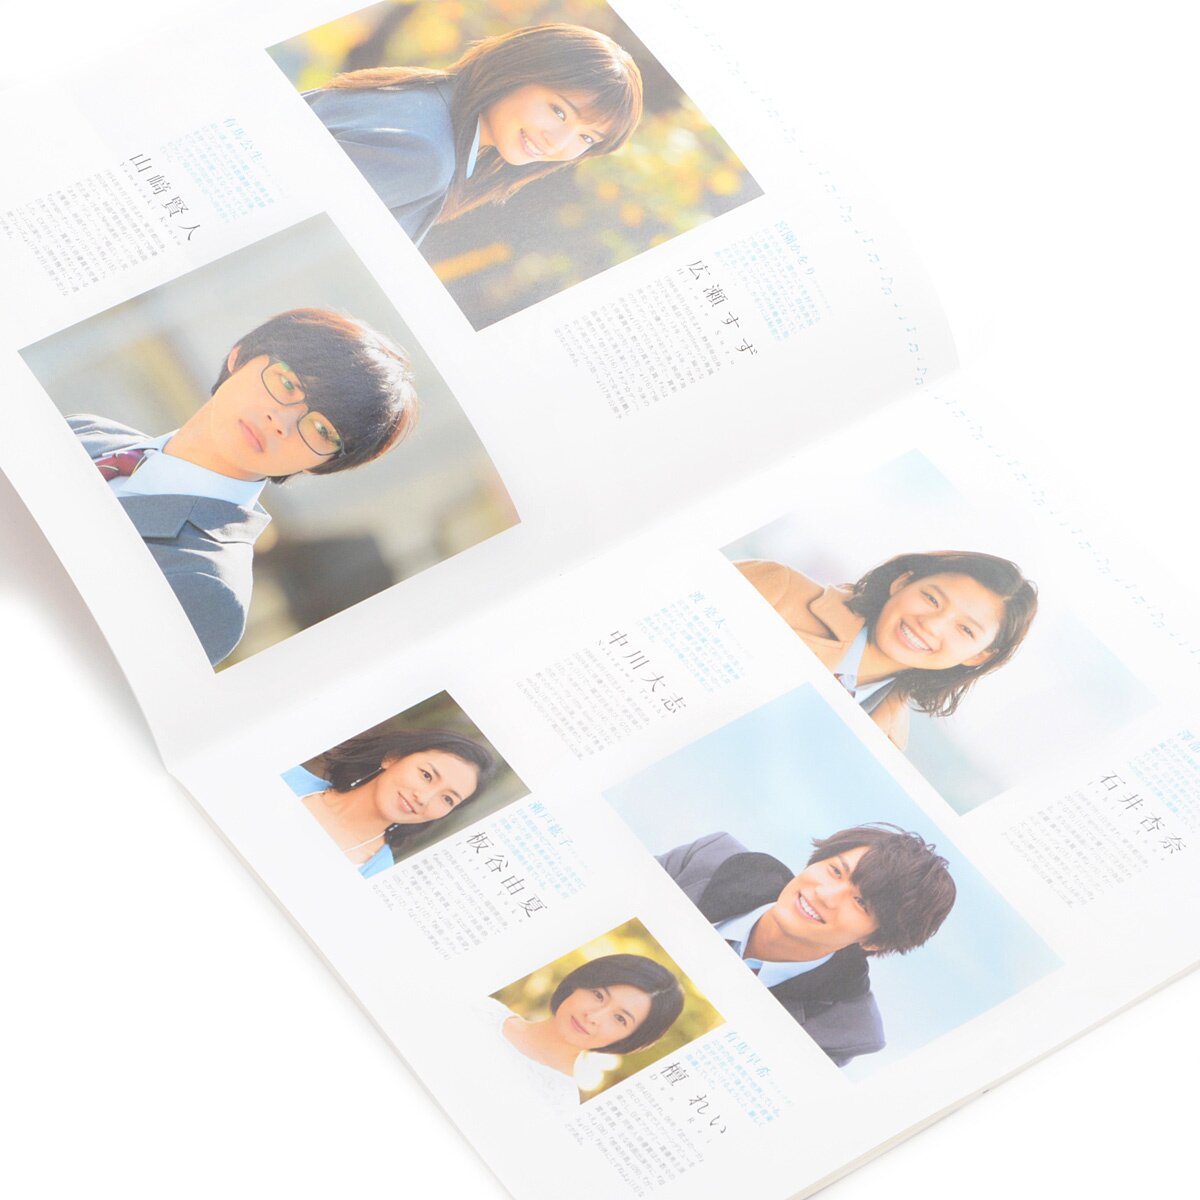 your lie in april live action home release